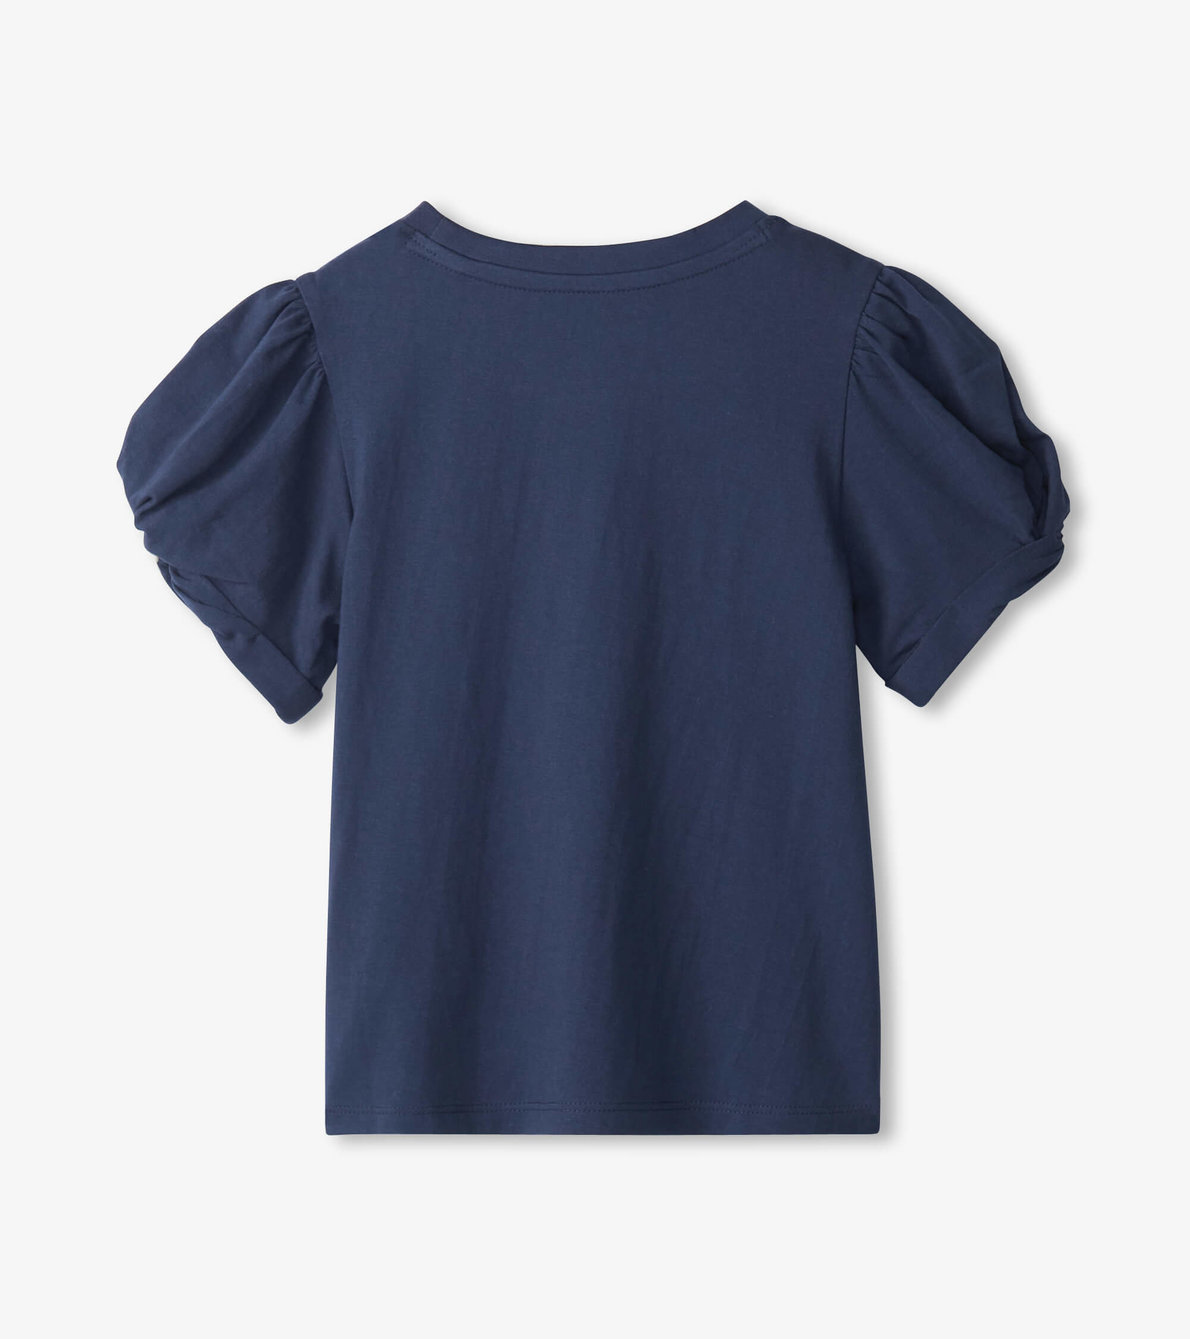 View larger image of Girls Navy Twisted Sleeve Tee